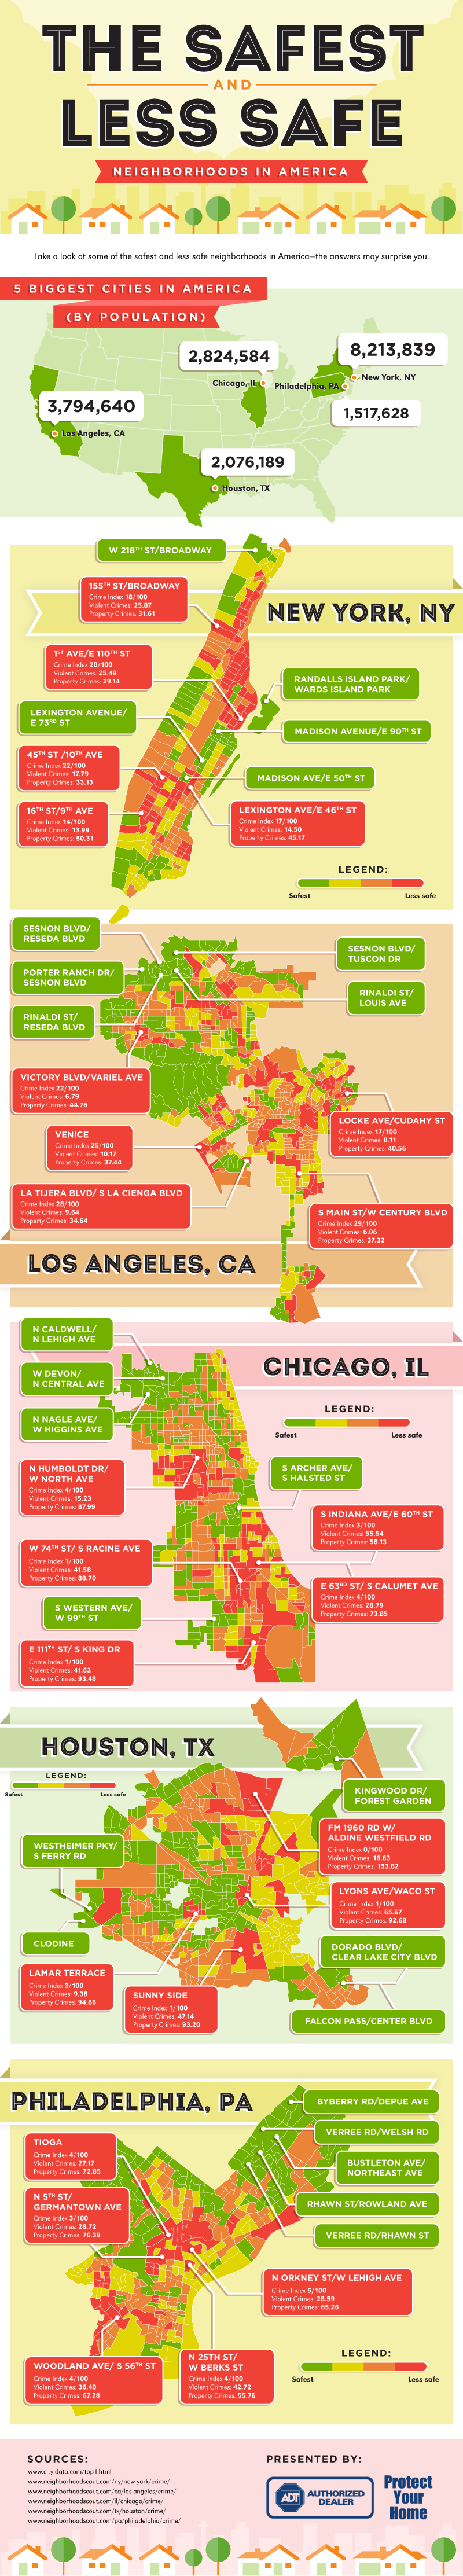 The Safest and Less Safe Neighborhoods in America